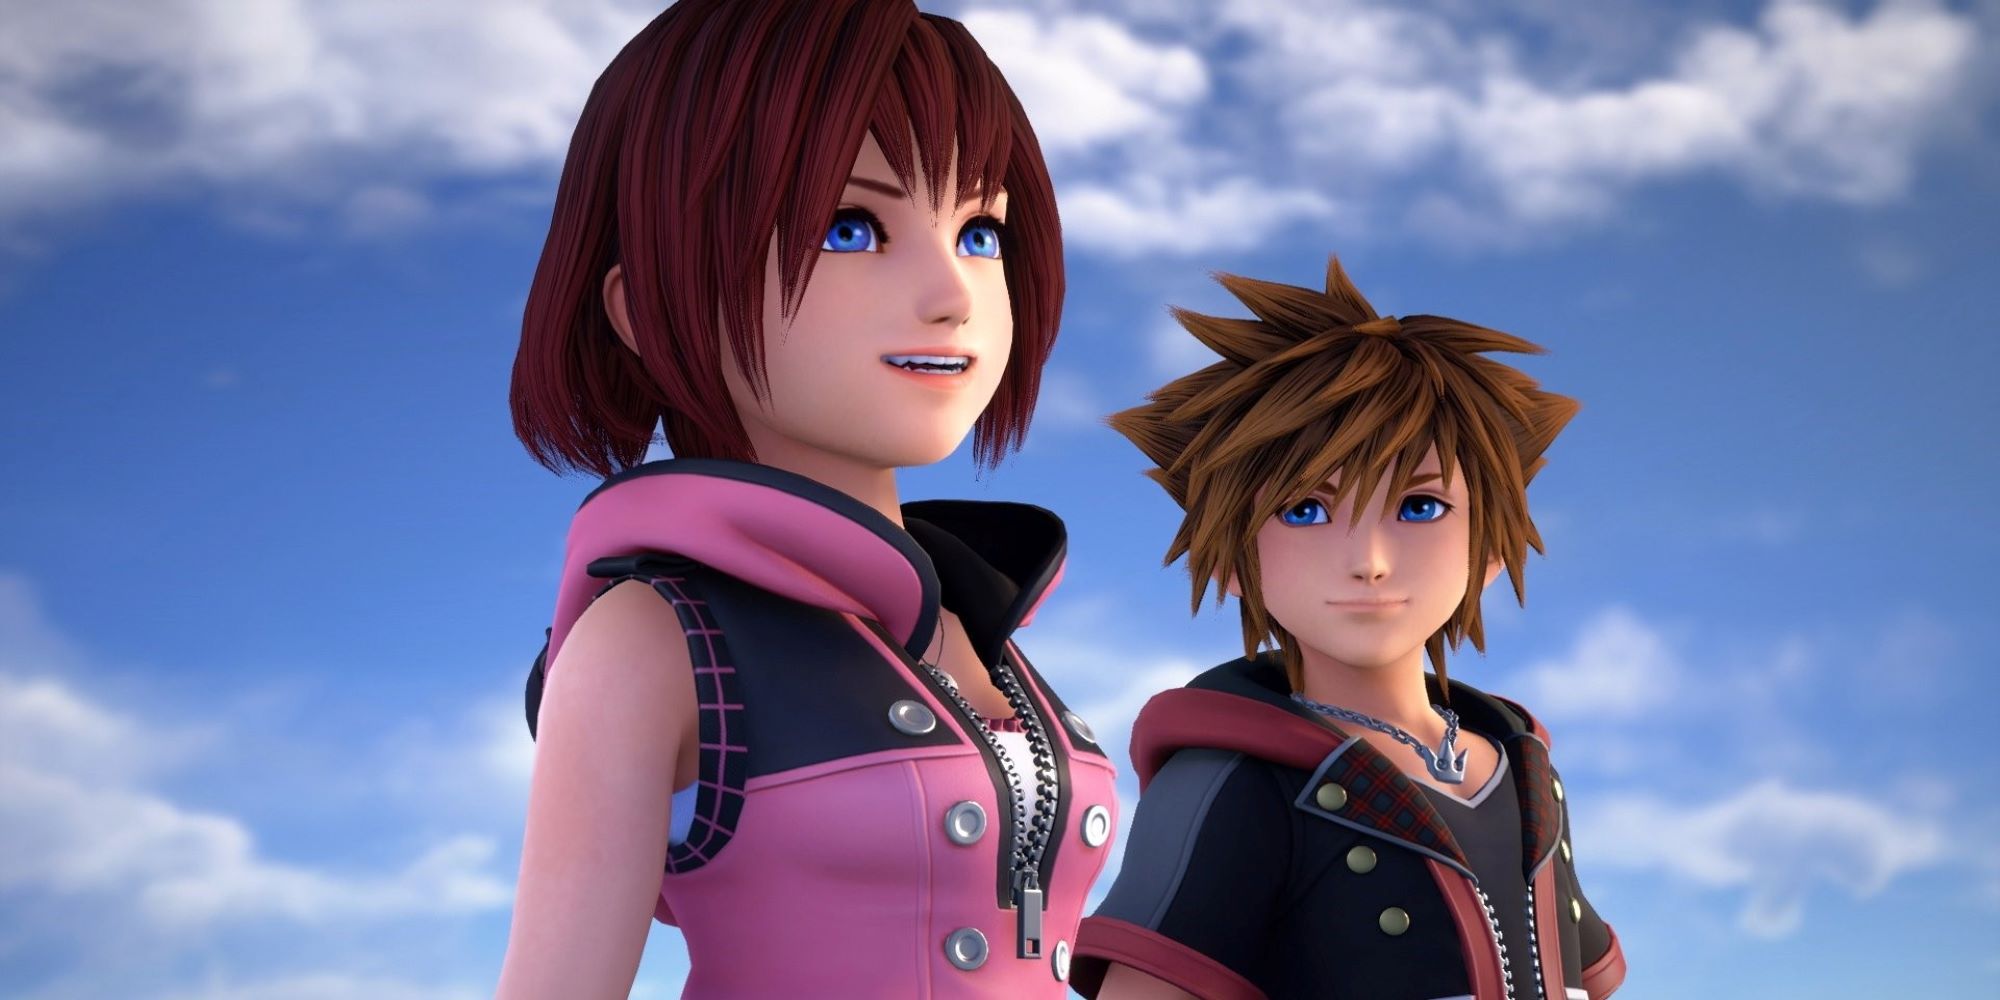 What Each Choice Means At the Beginning Of Kingdom Hearts 3